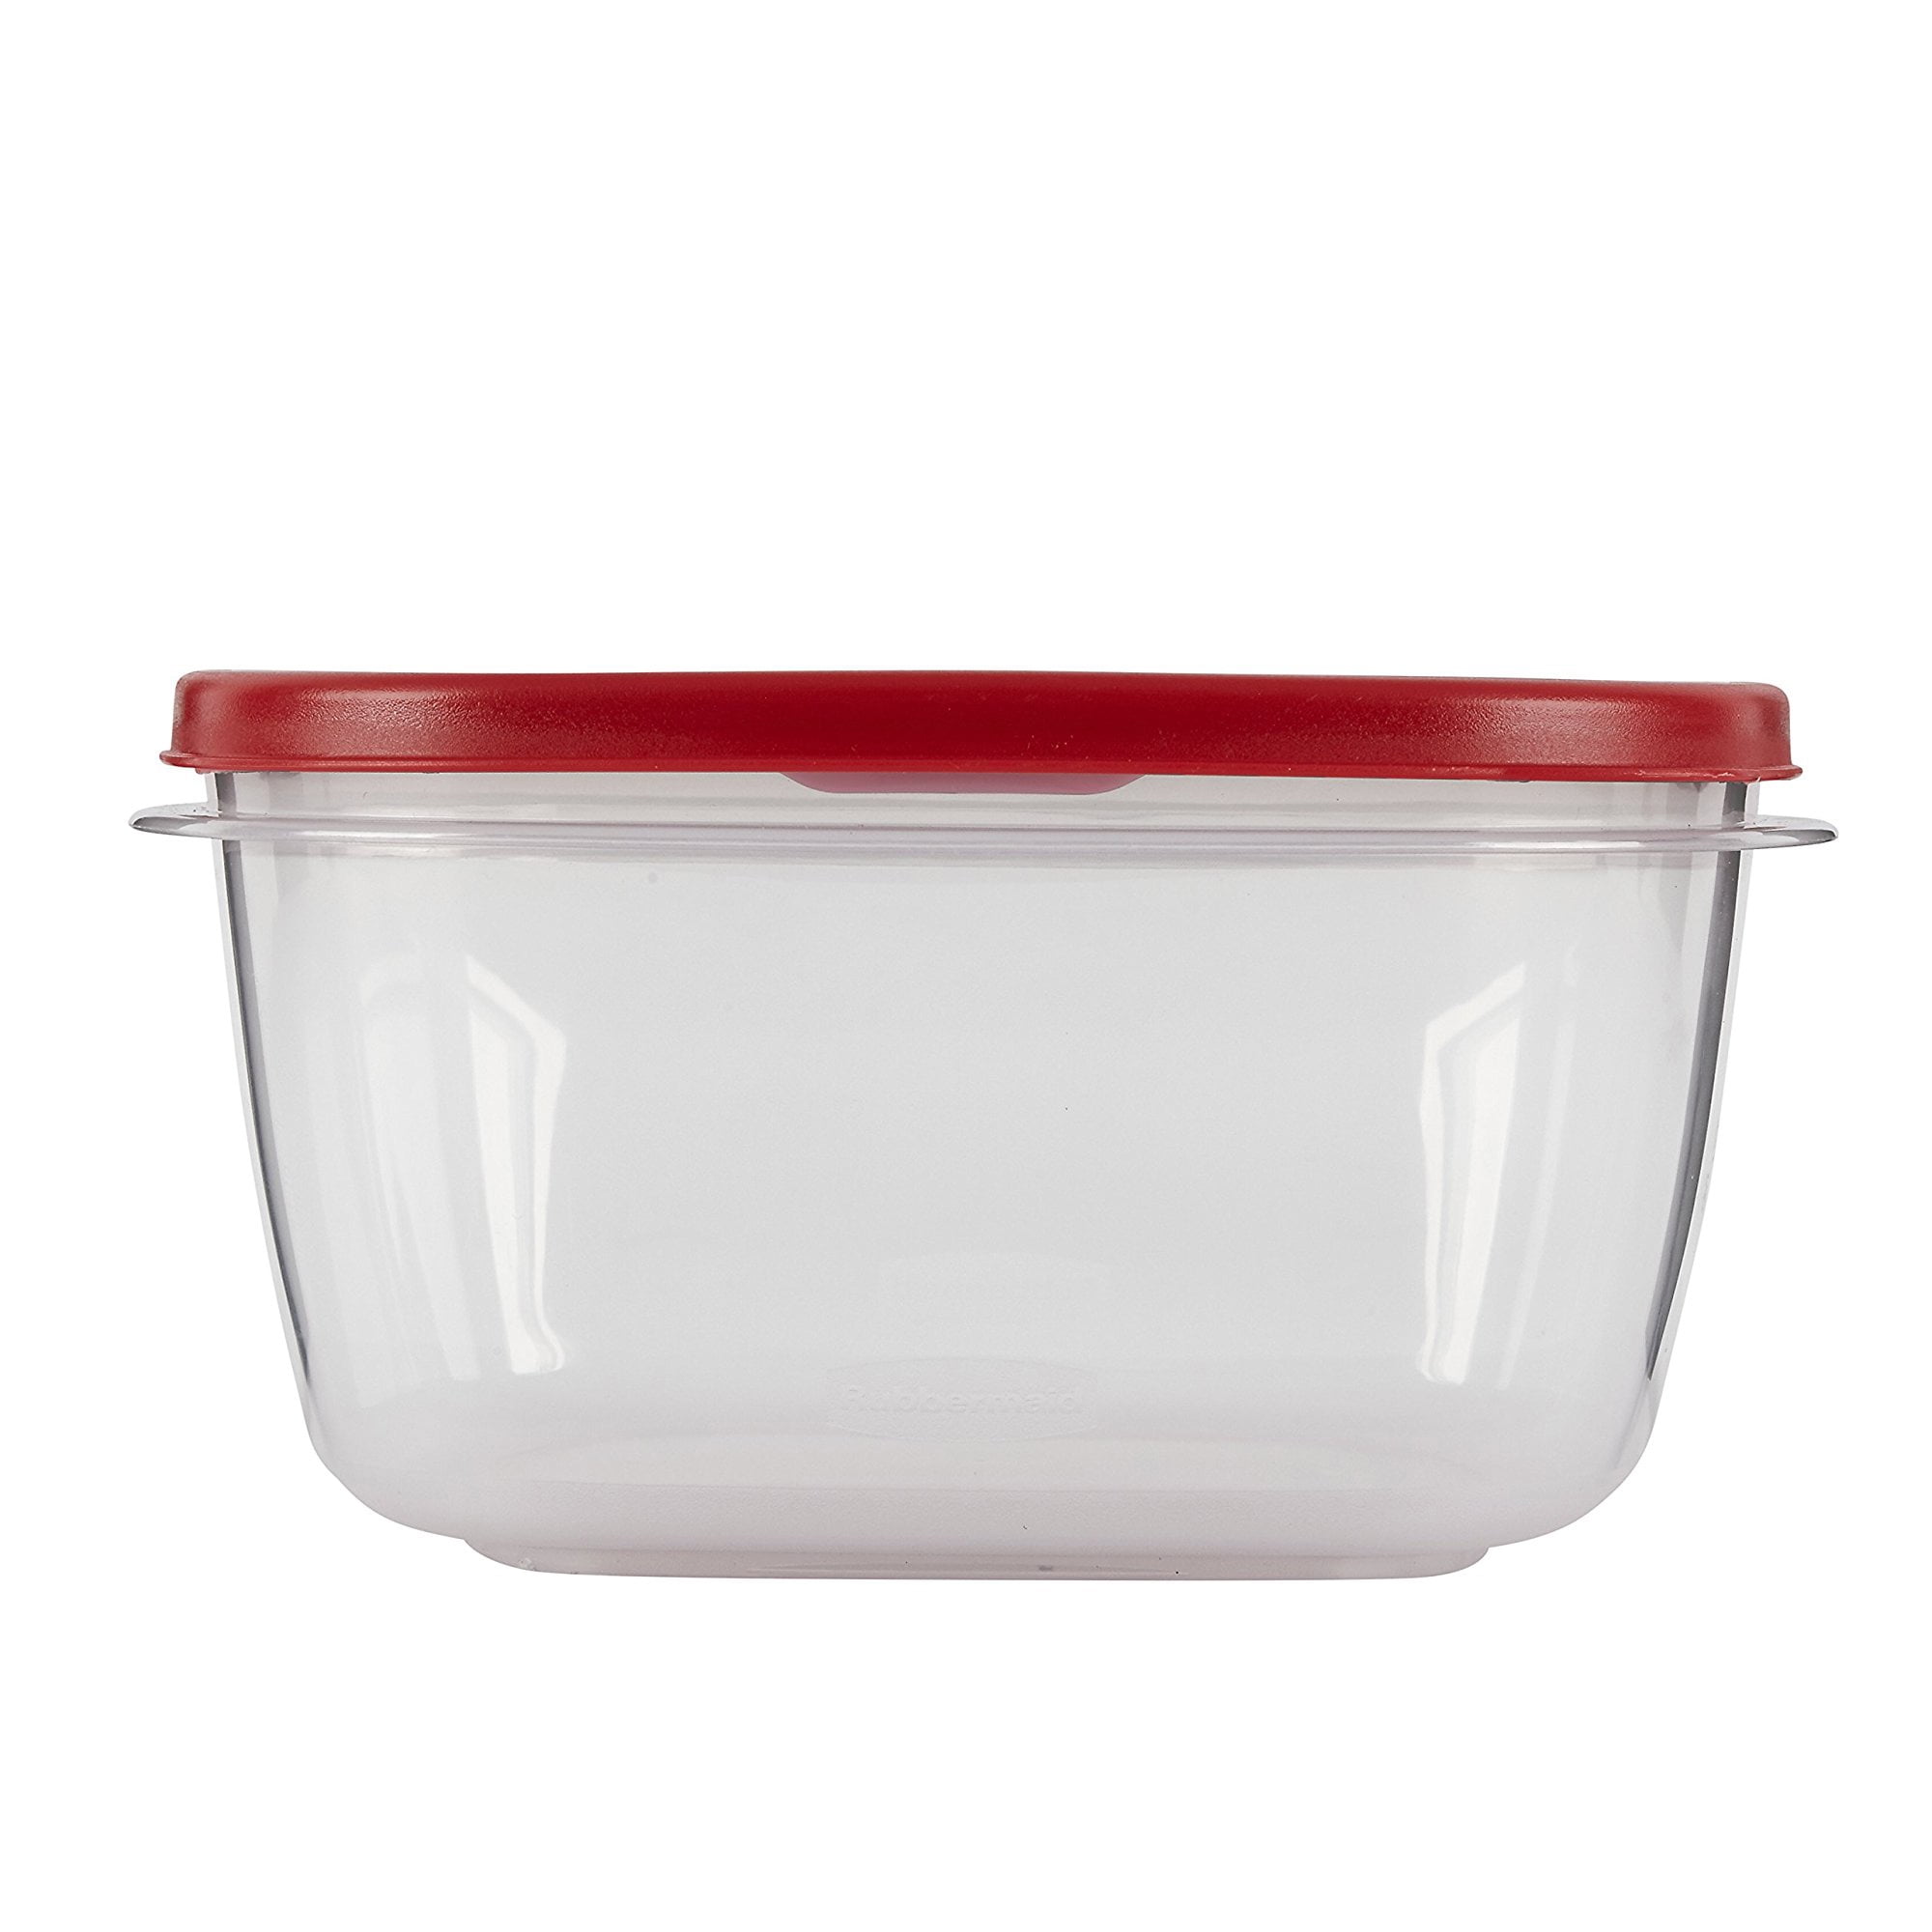 Rubbermaid Easy Find Lids 14-Cup Flex & Seal Food Storage Container (4-Pack)